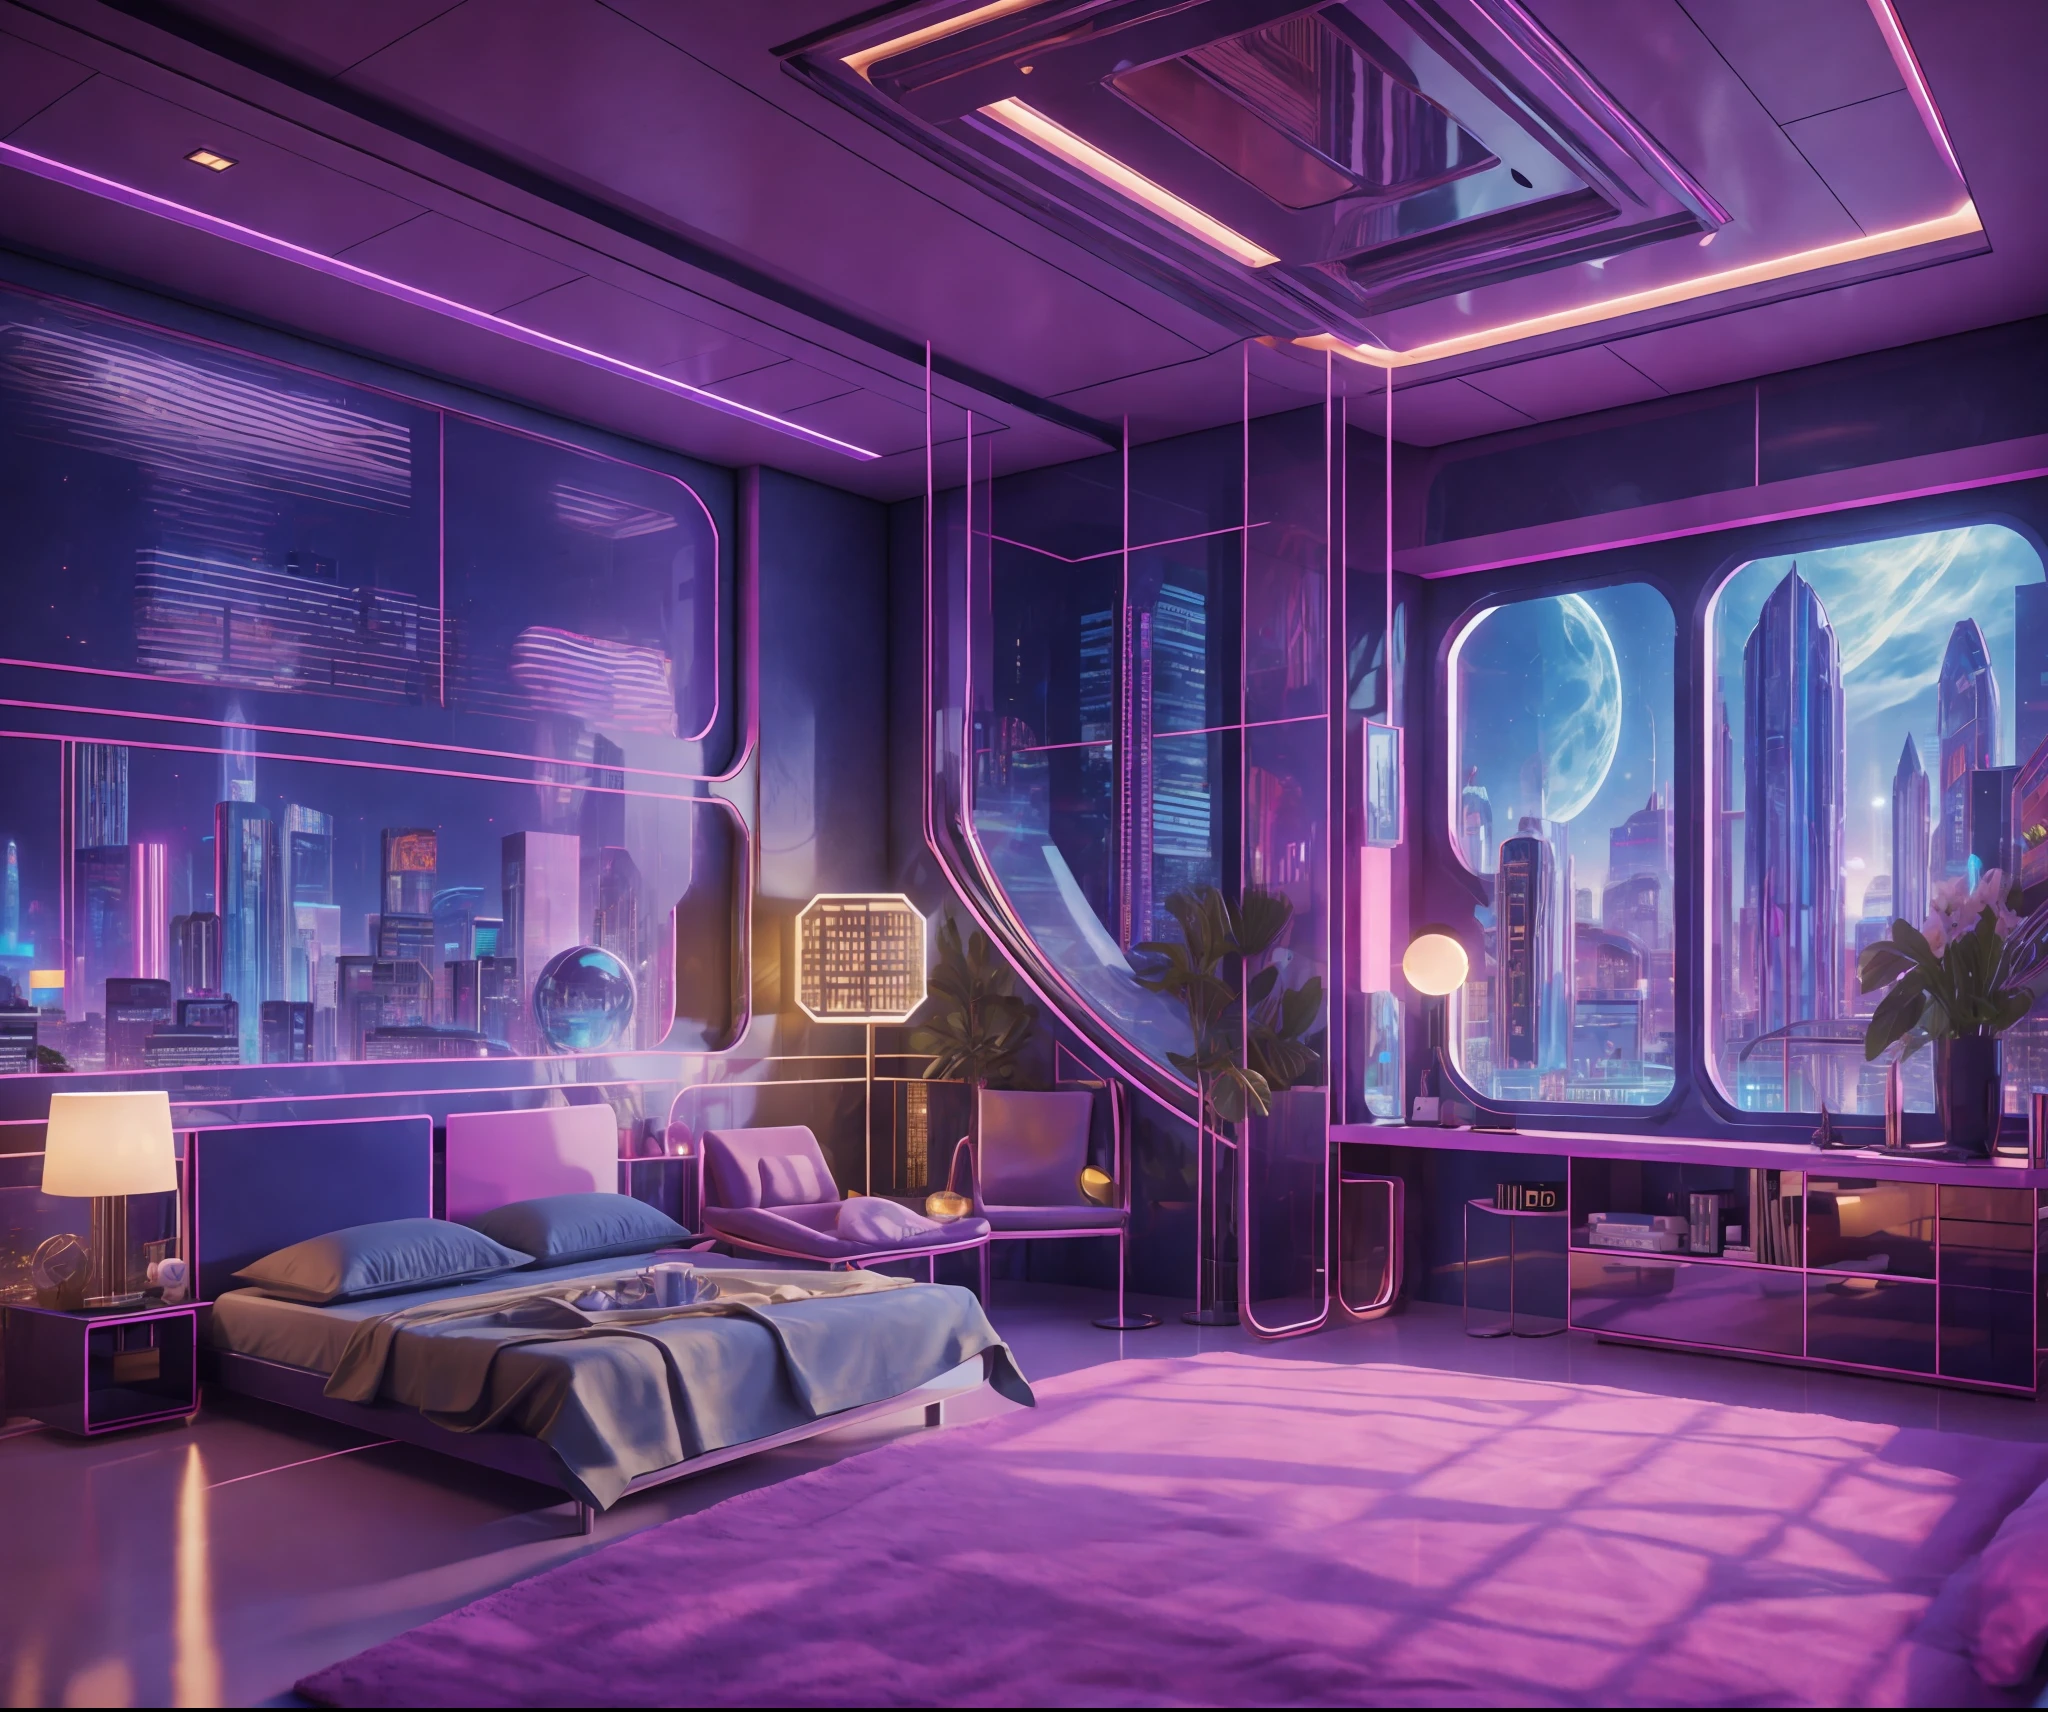 ((masterpiece)), (ultra-detailed), (intricate details), (high resolution CGI artwork 8k), Create an image of a woman's bedroom with low lighting. One of the walls should feature a big window with a busy, colorful, and detailed cyberpunk cityscape. Futuristic style with lots of colors and LED lights. The cityscape should be extremely detailed with depth of field. Utilize atmospheric lighting to create depth and evoke the feel of a busy futuristic city outside the window. Pay close attention to face details like intricate, hires eyes and bedroom accents.